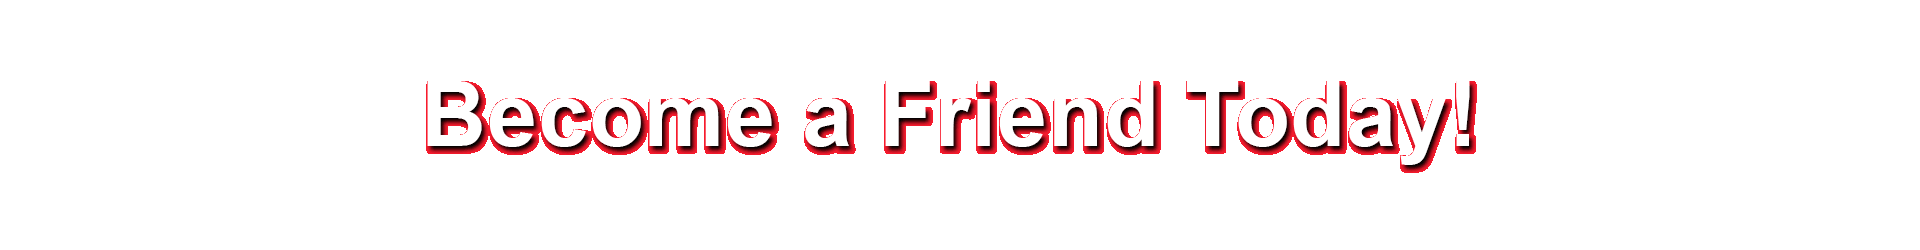 Become a Friend Today!